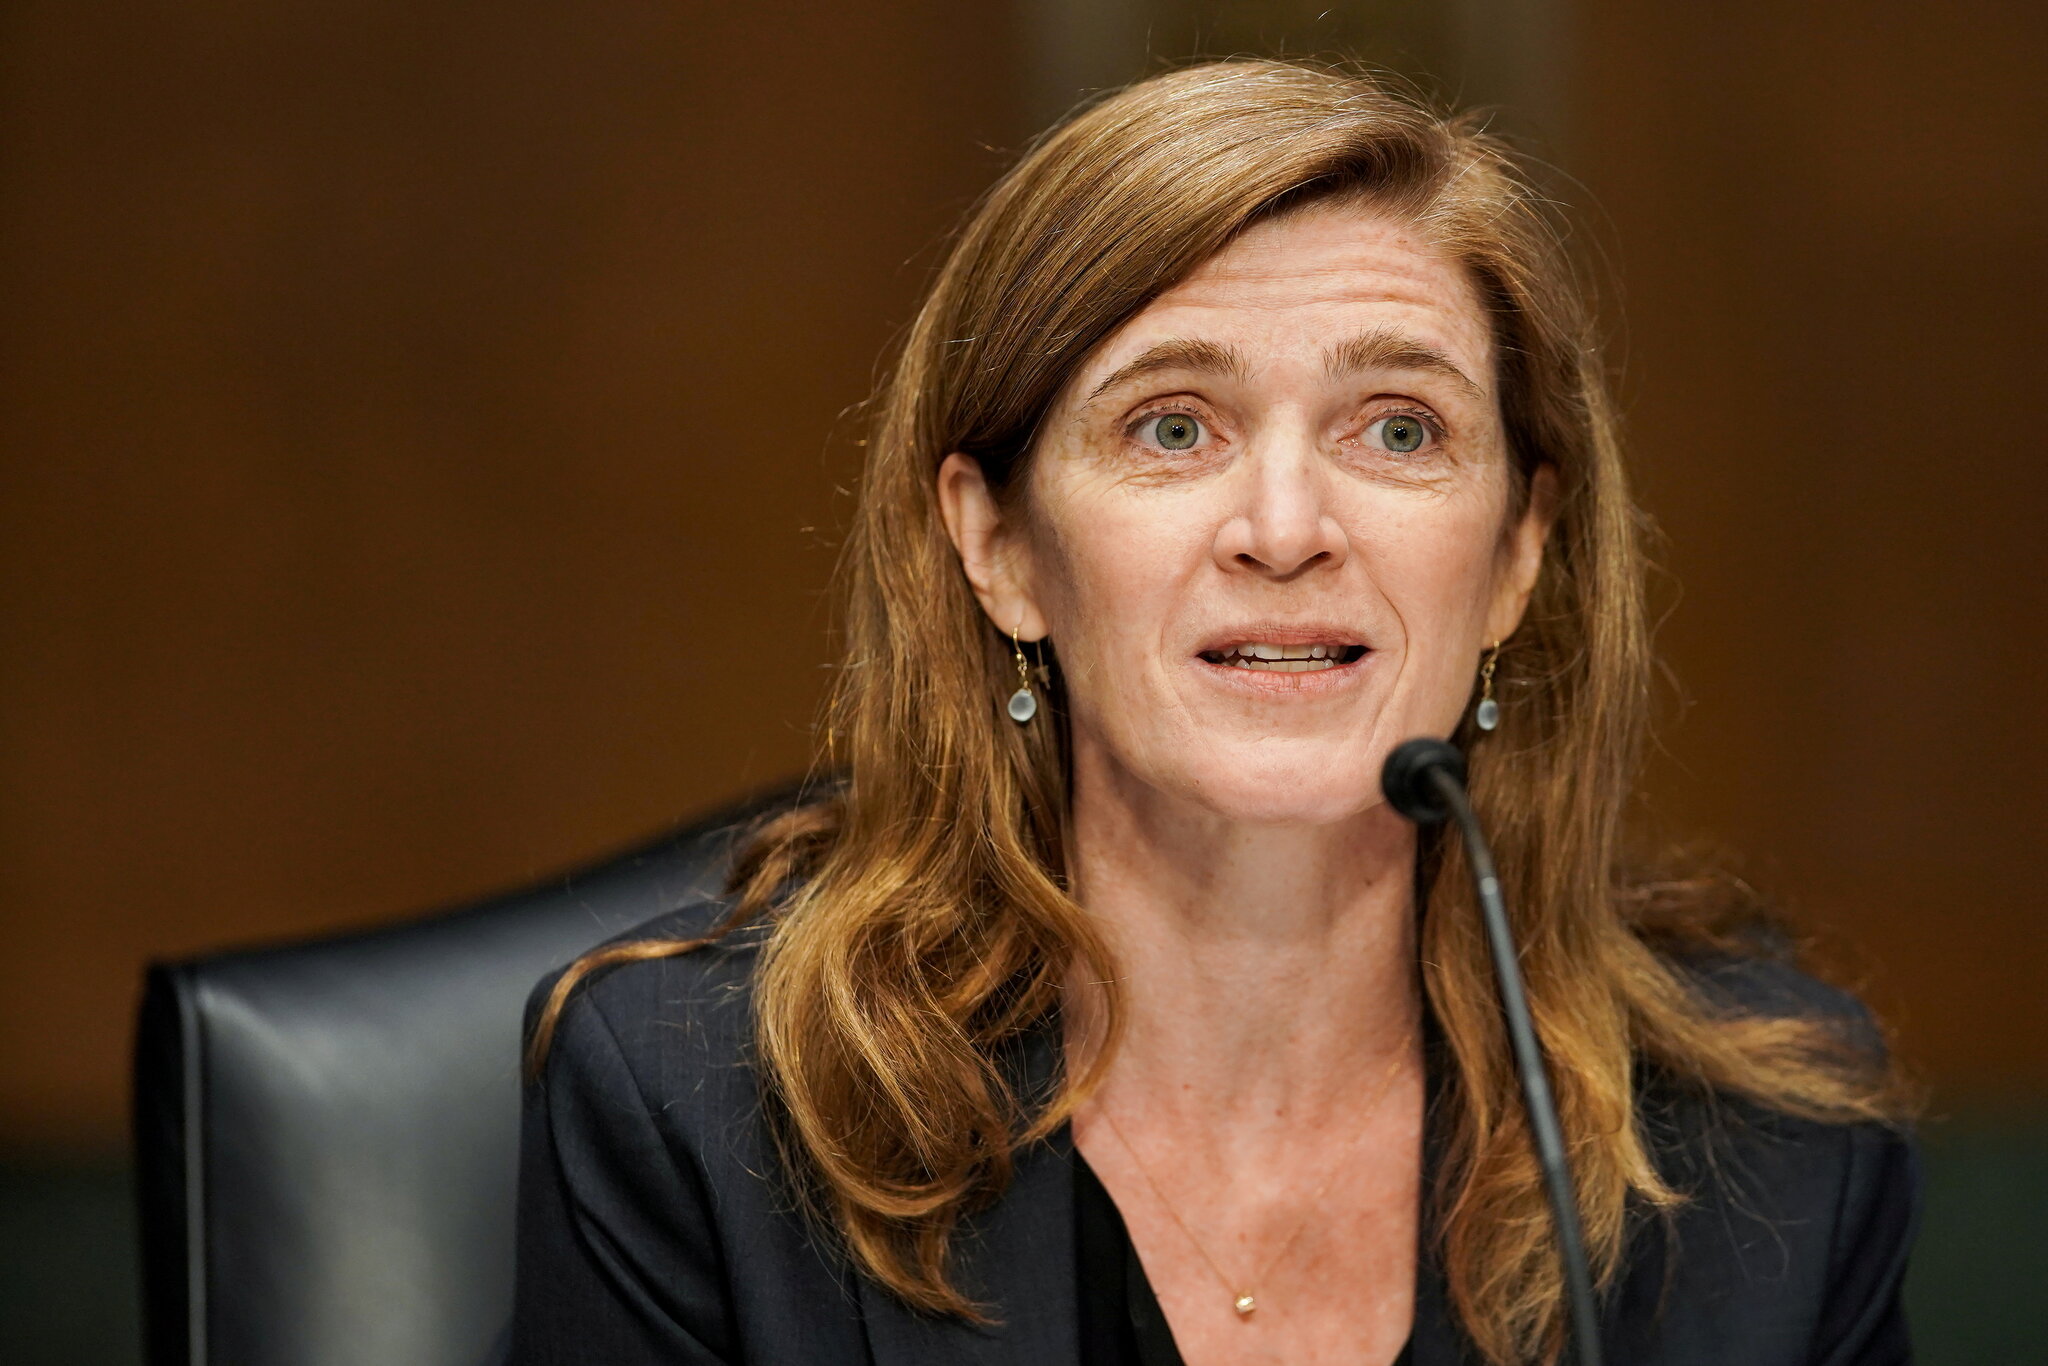 USAID administrator Samantha Power arriving in Nepal today